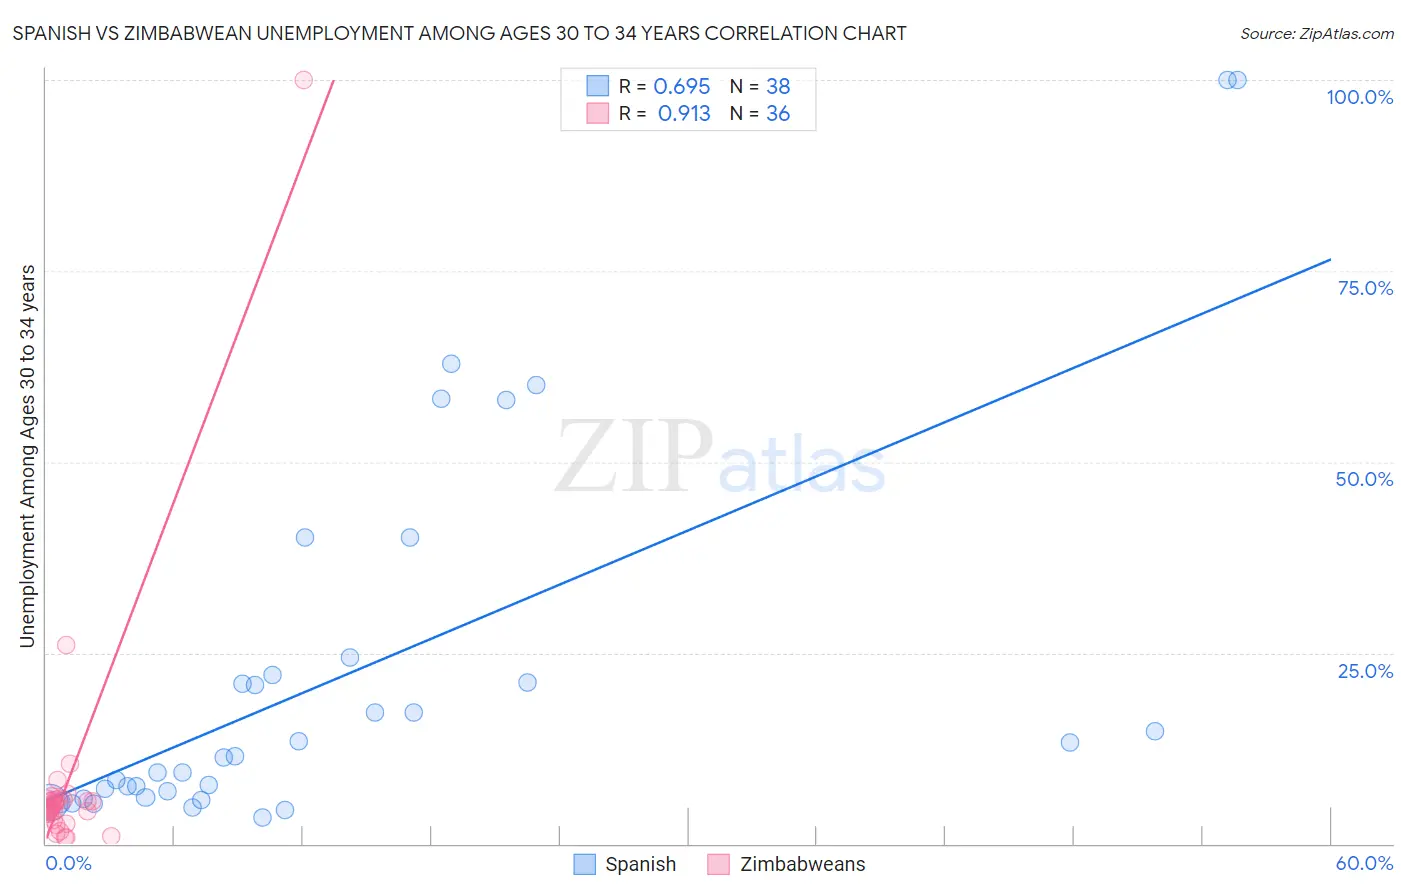 Spanish vs Zimbabwean Unemployment Among Ages 30 to 34 years